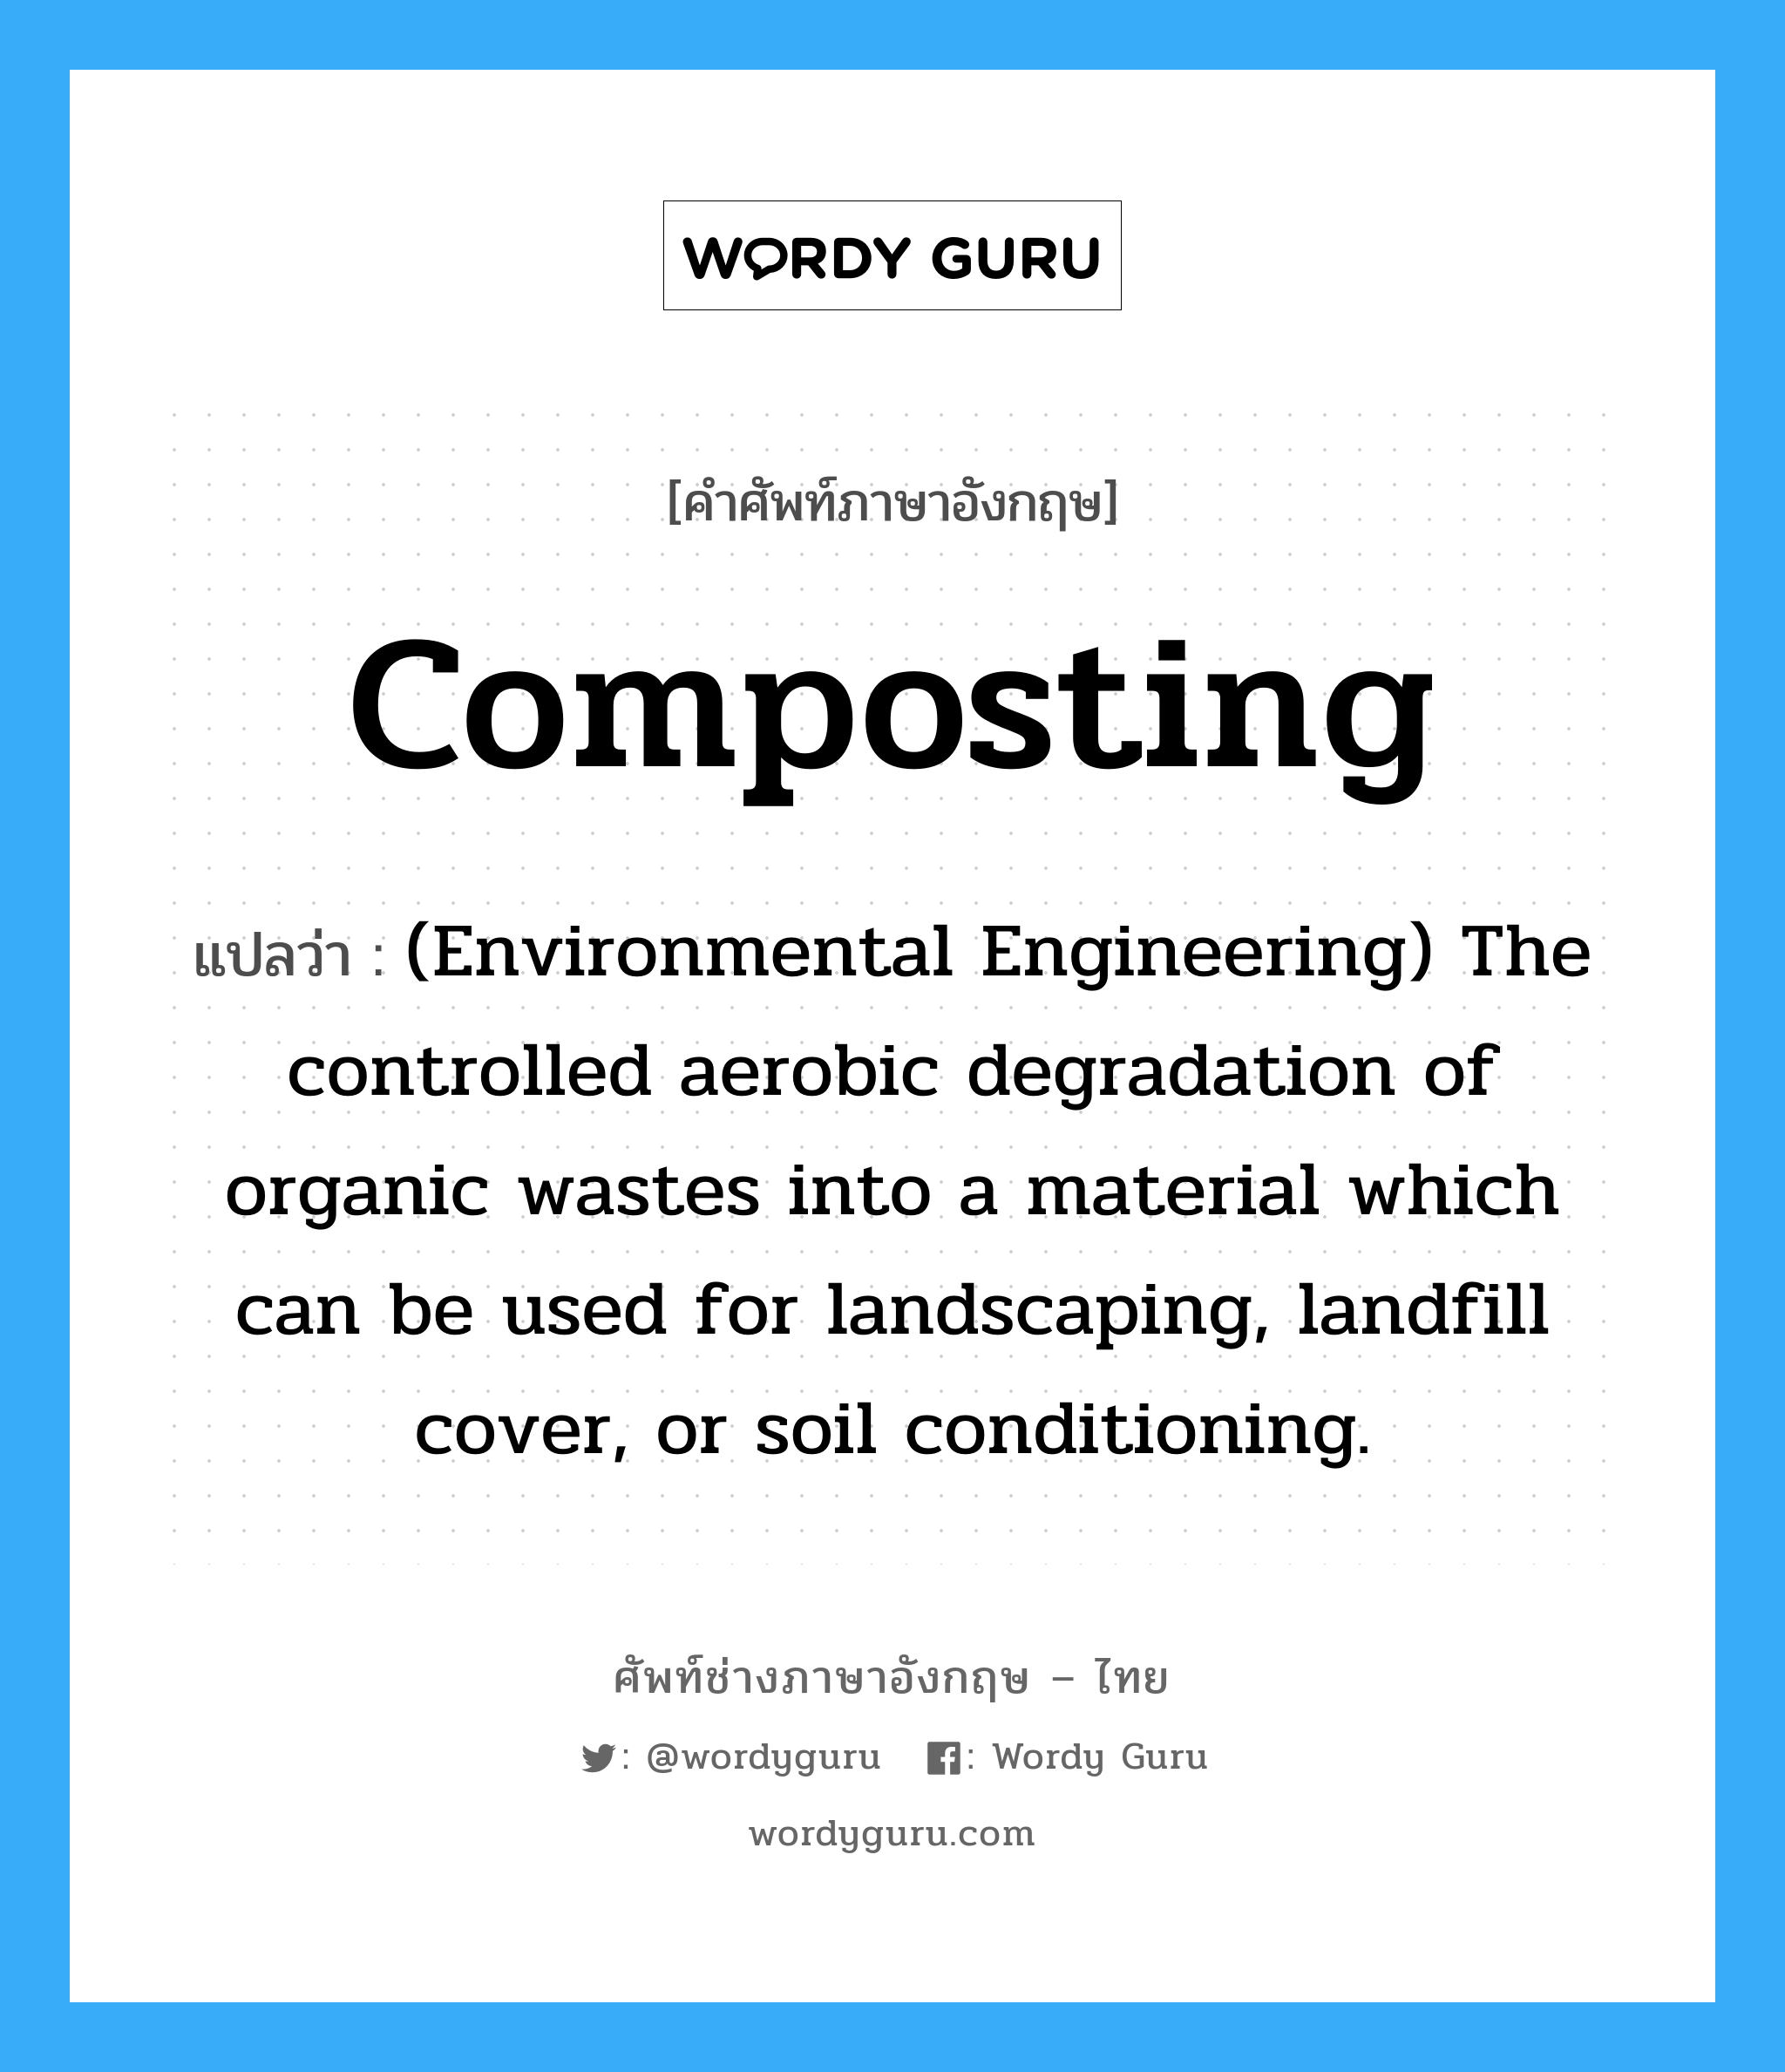 Composting แปลว่า?, คำศัพท์ช่างภาษาอังกฤษ - ไทย Composting คำศัพท์ภาษาอังกฤษ Composting แปลว่า (Environmental Engineering) The controlled aerobic degradation of organic wastes into a material which can be used for landscaping, landfill cover, or soil conditioning.